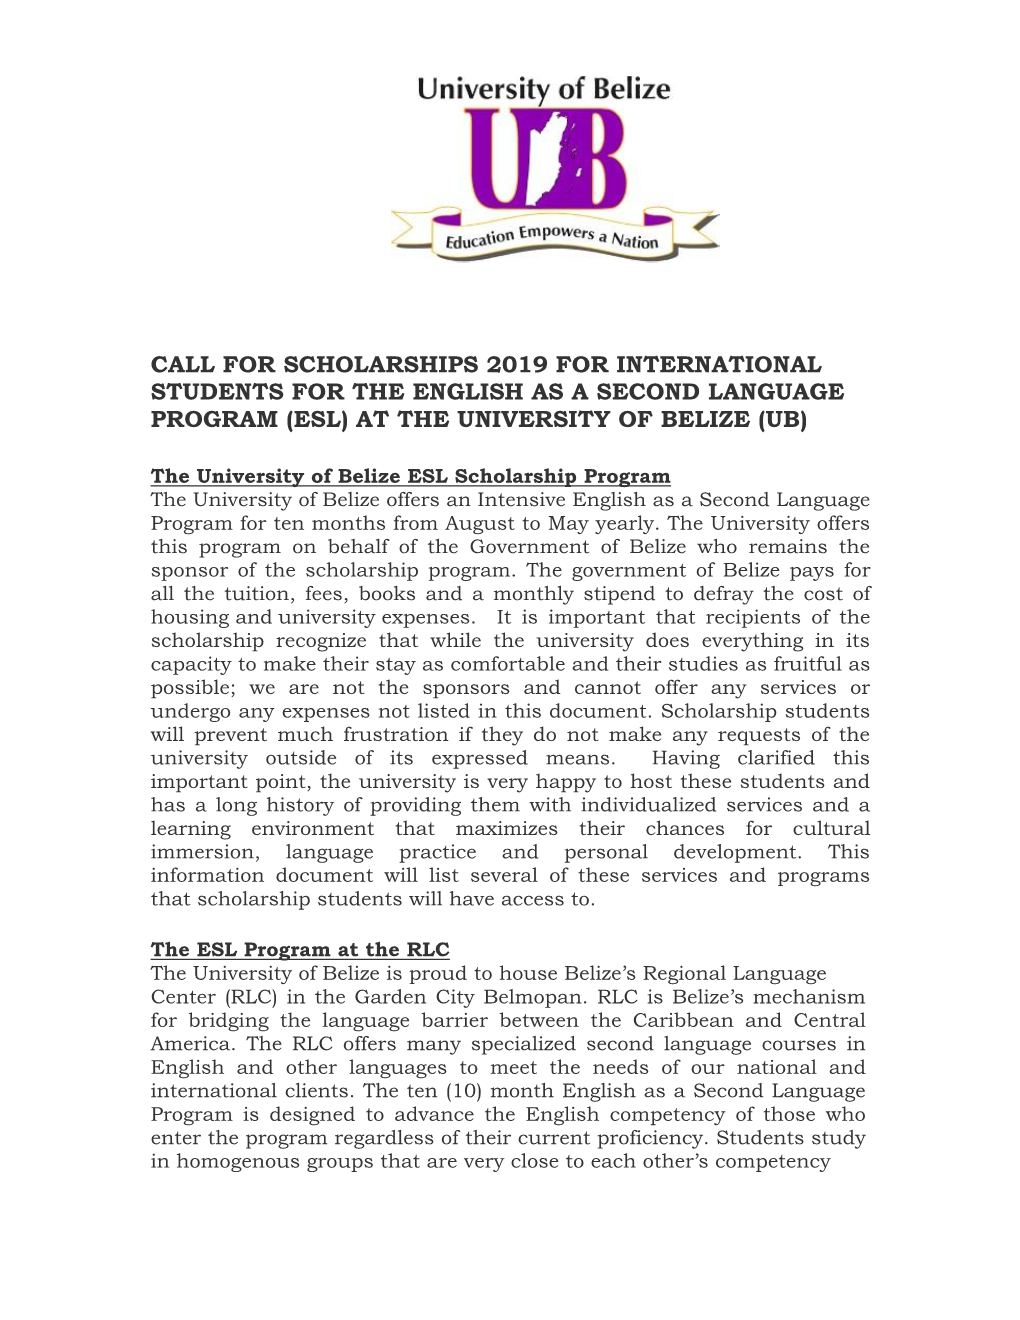 Call for Scholarships 2019 for International Students for the English As a Second Language Program (Esl) at the University of Belize (Ub)